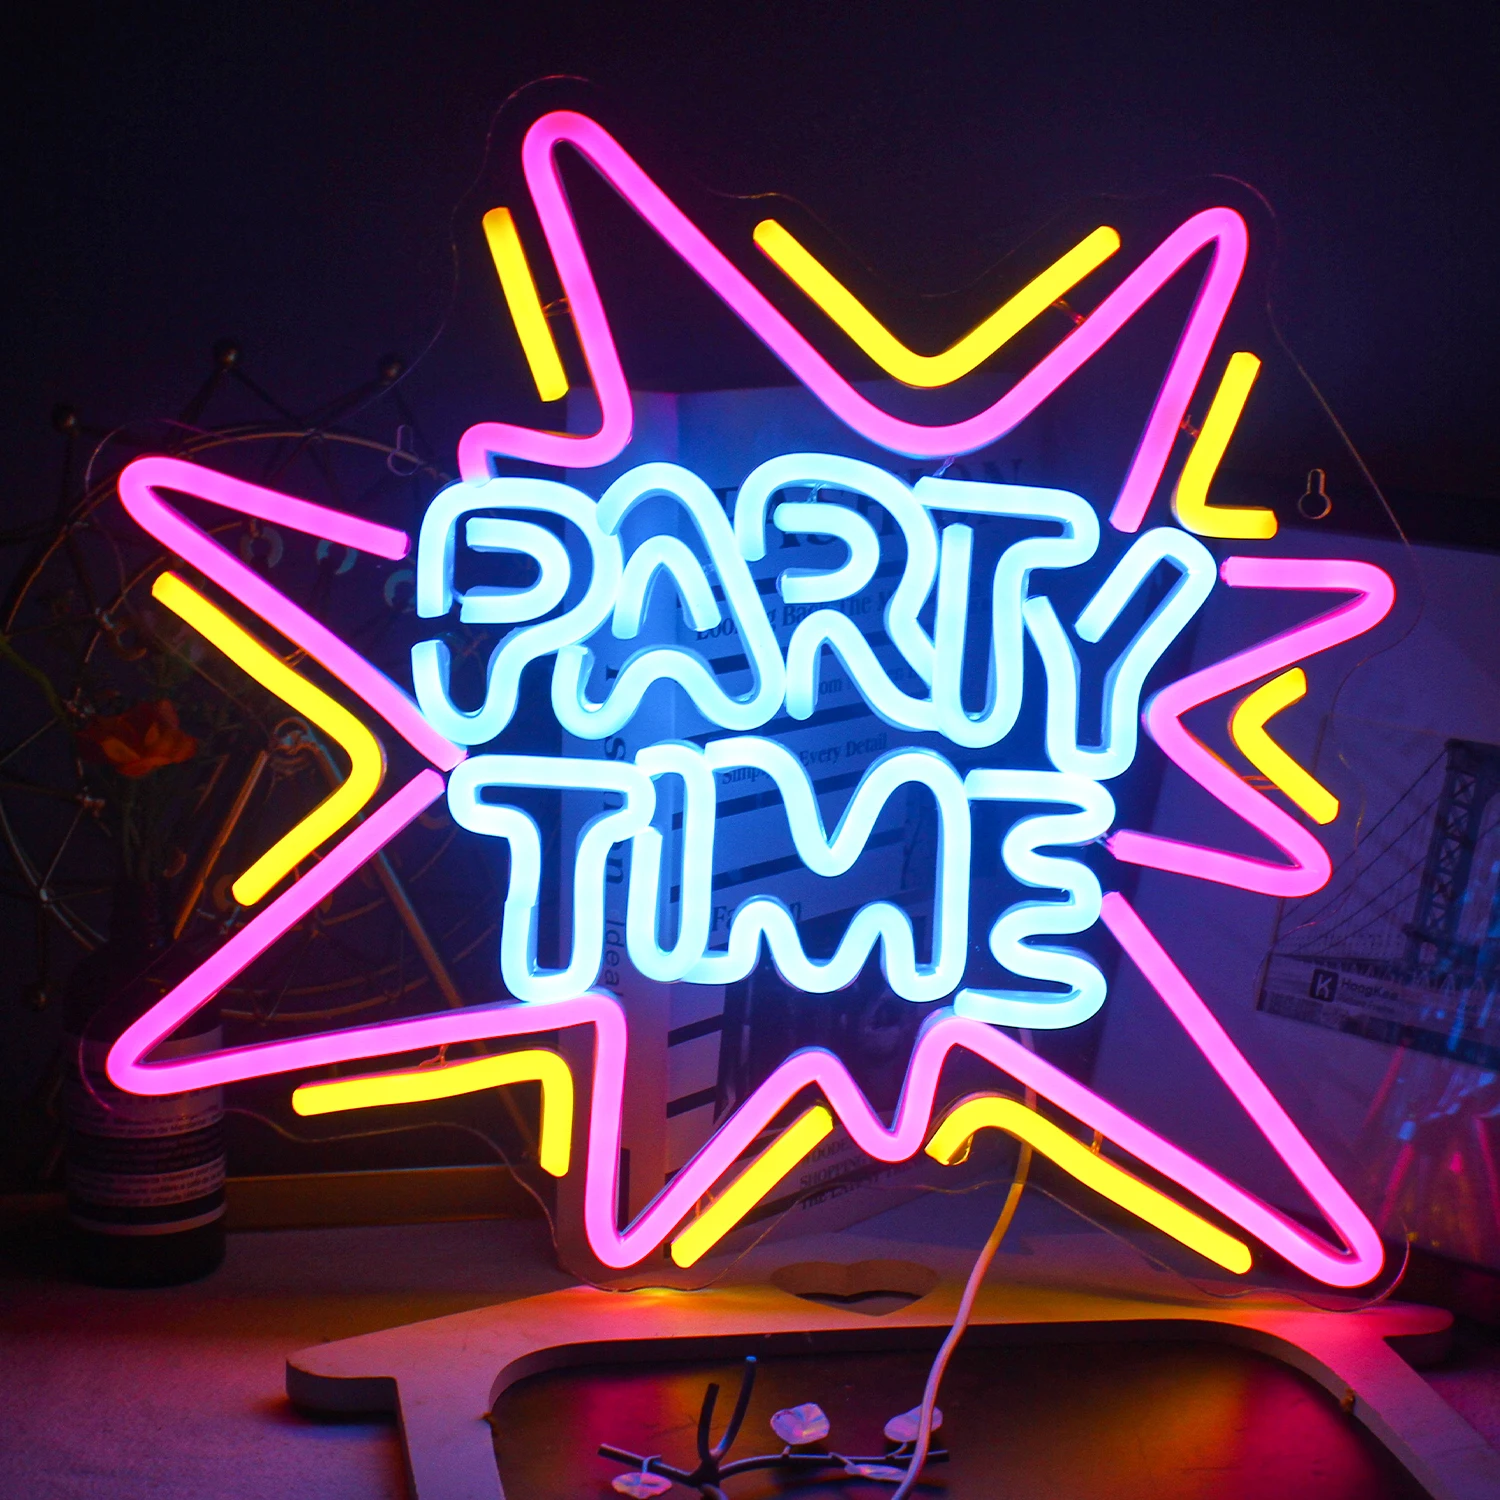 

Party Time Lighting Neon Sign LED For Party Birthdays Weddings Bar Club of Various Festivals Indoor Wall Decor LED Neon Light